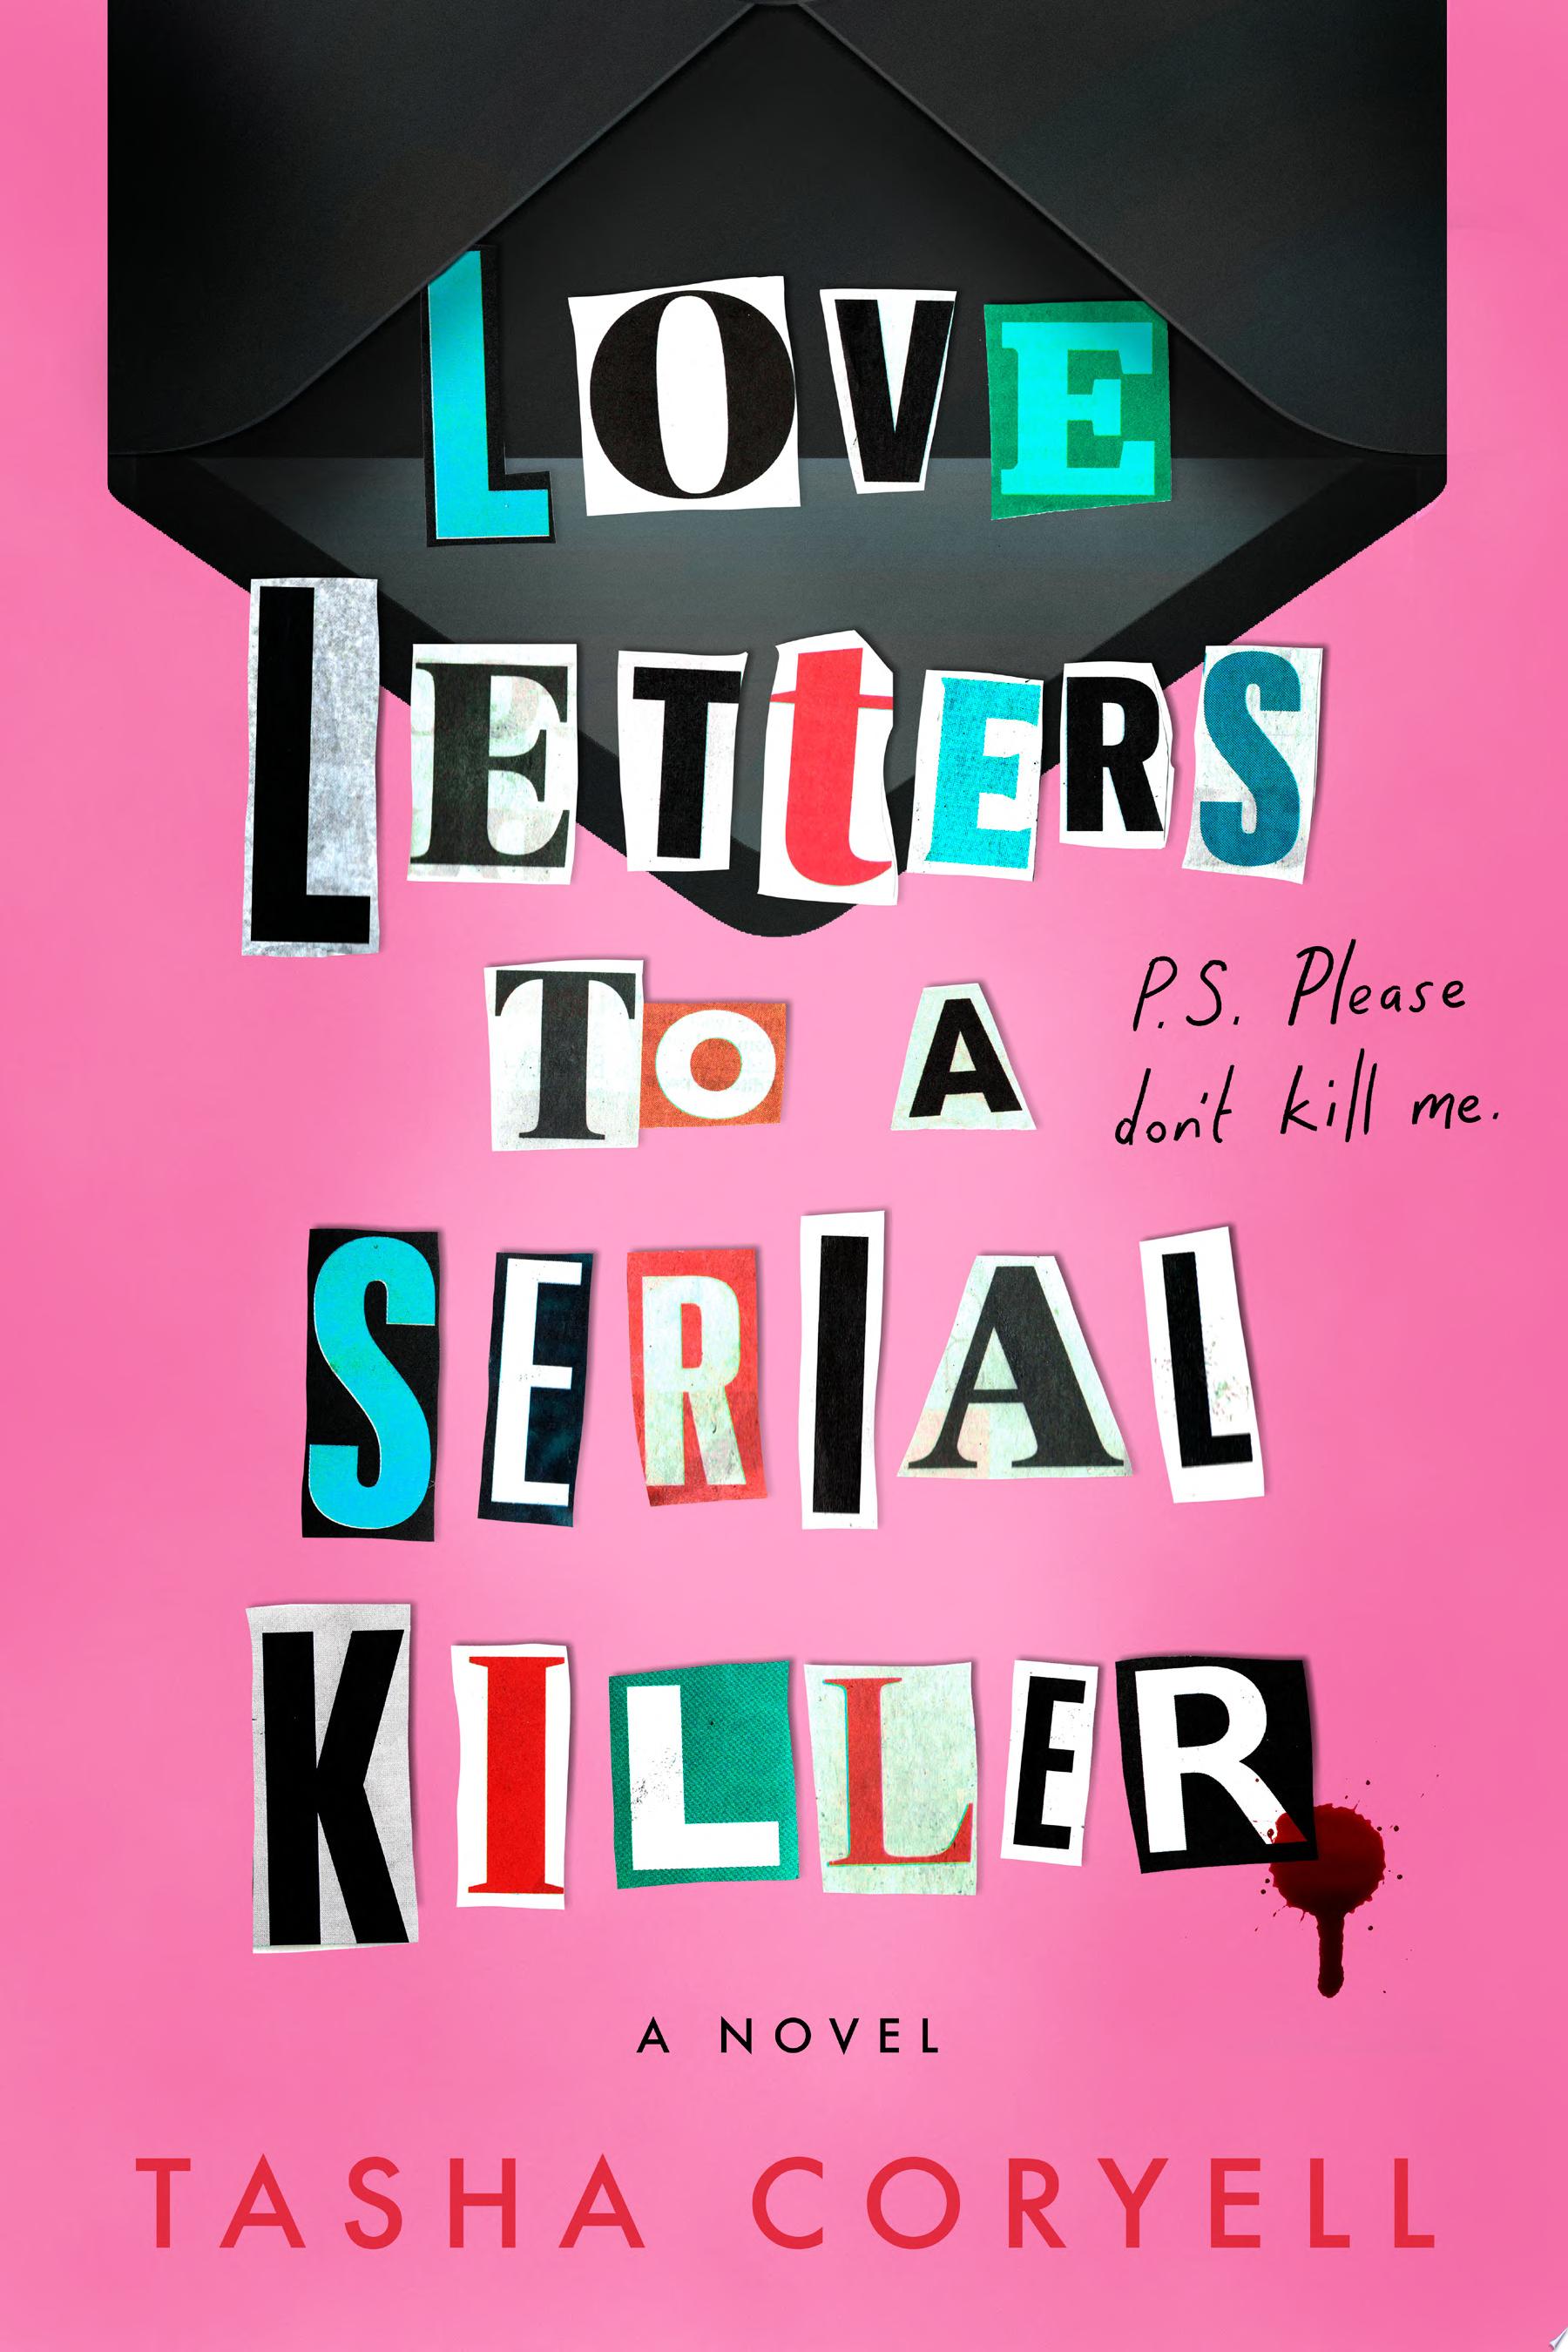 Image for "Love Letters to a Serial Killer"